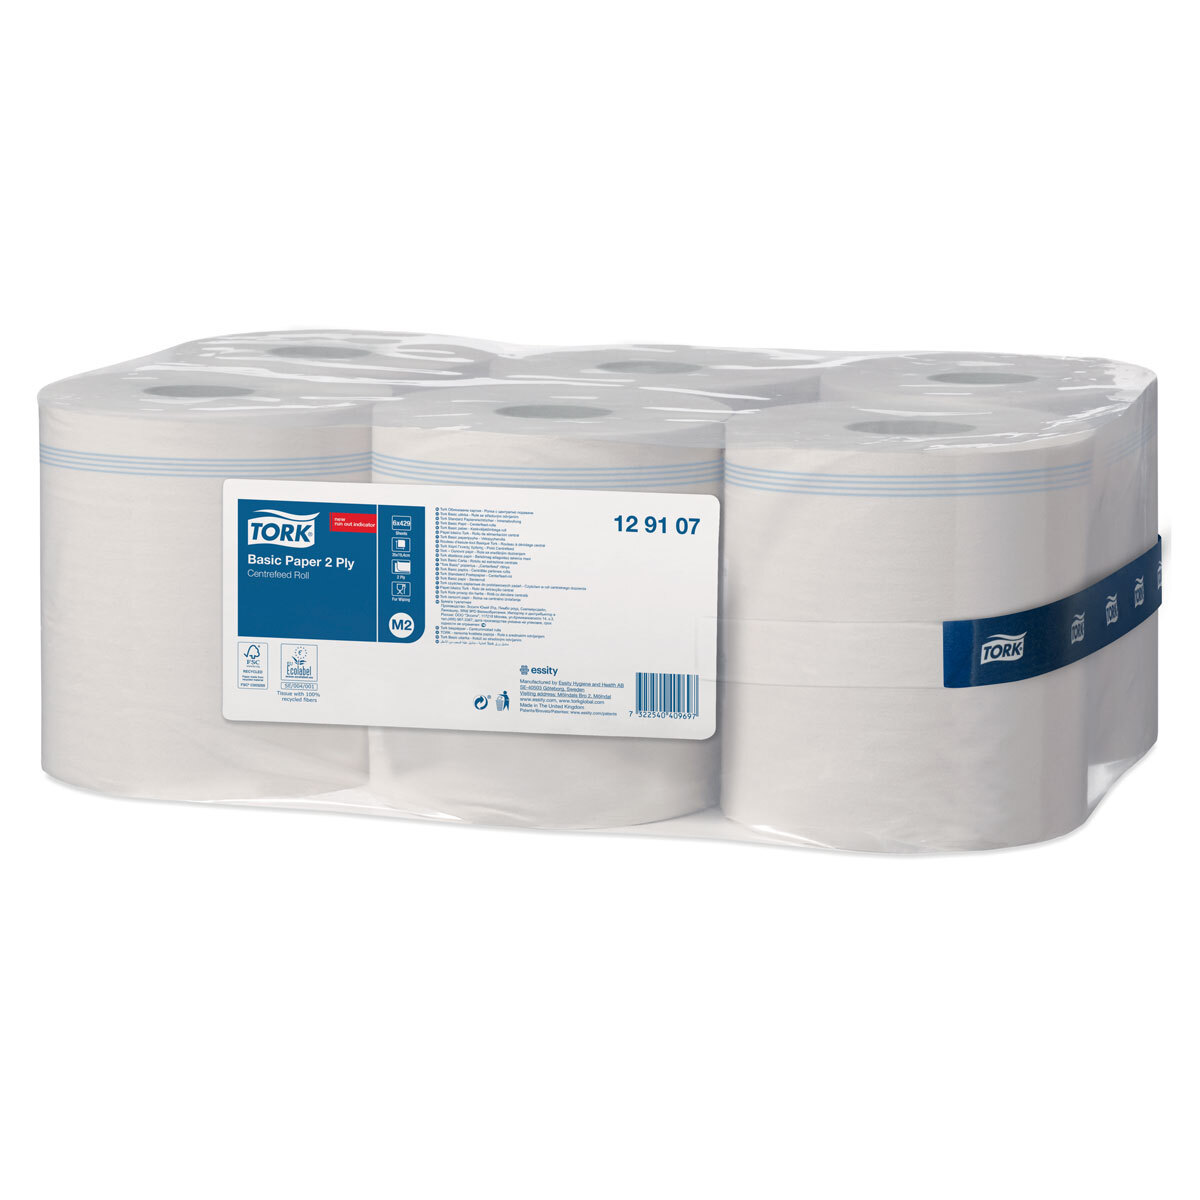 6 x 150m 2 Ply Wiping Paper Towels M2 Tork Basic Centre Feed in White 